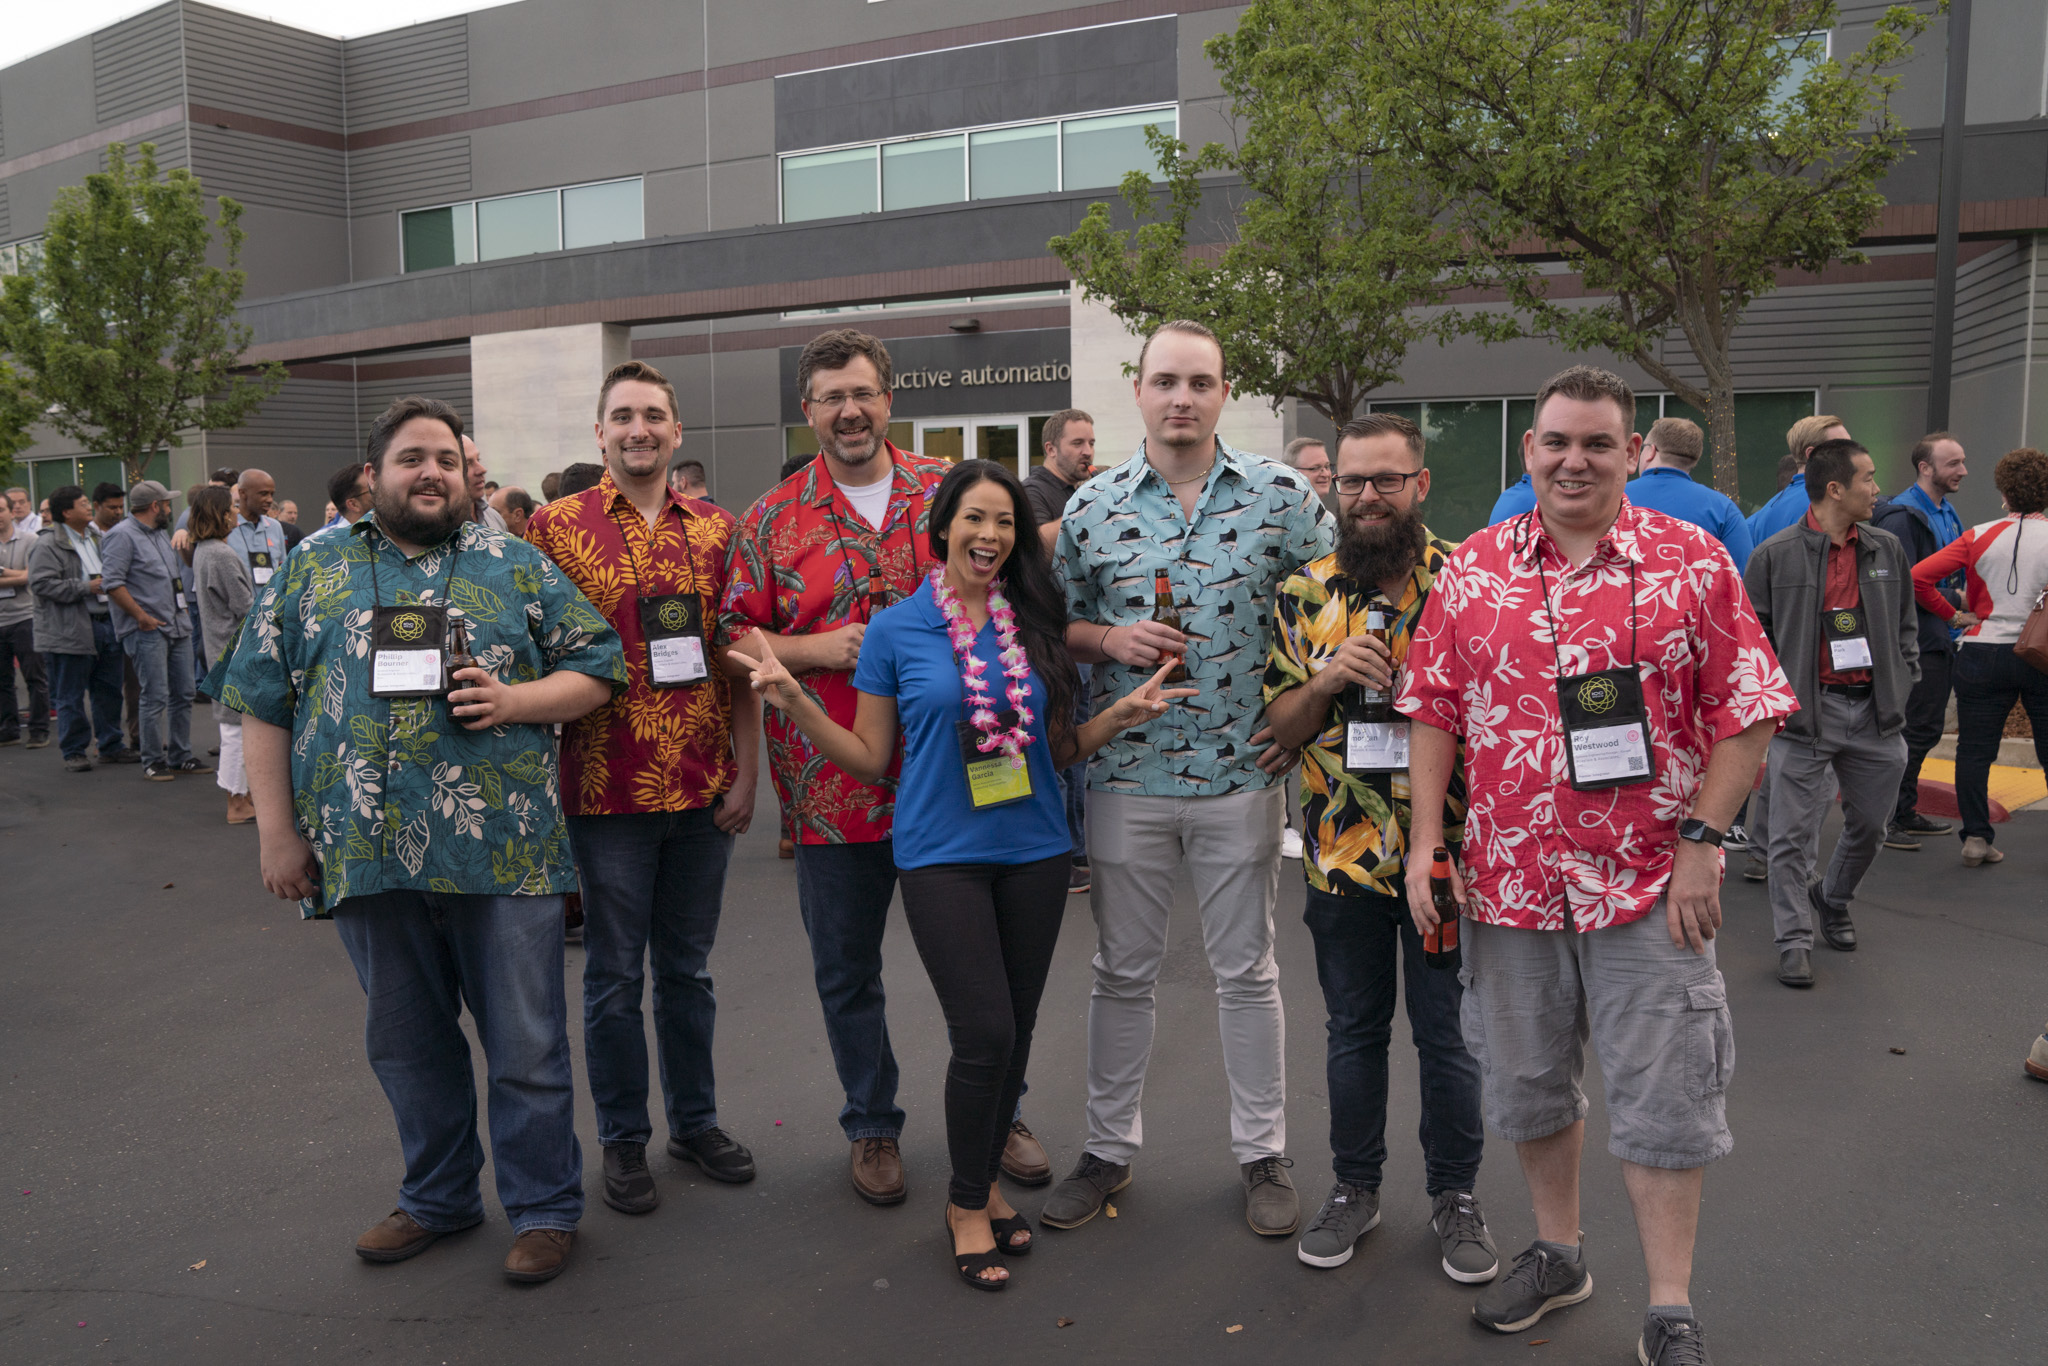 Six Roeslein employees wearing different Hawaiian shirts,  with IA Account Executive Vannessa Garcia standing in front holding up two peace signs